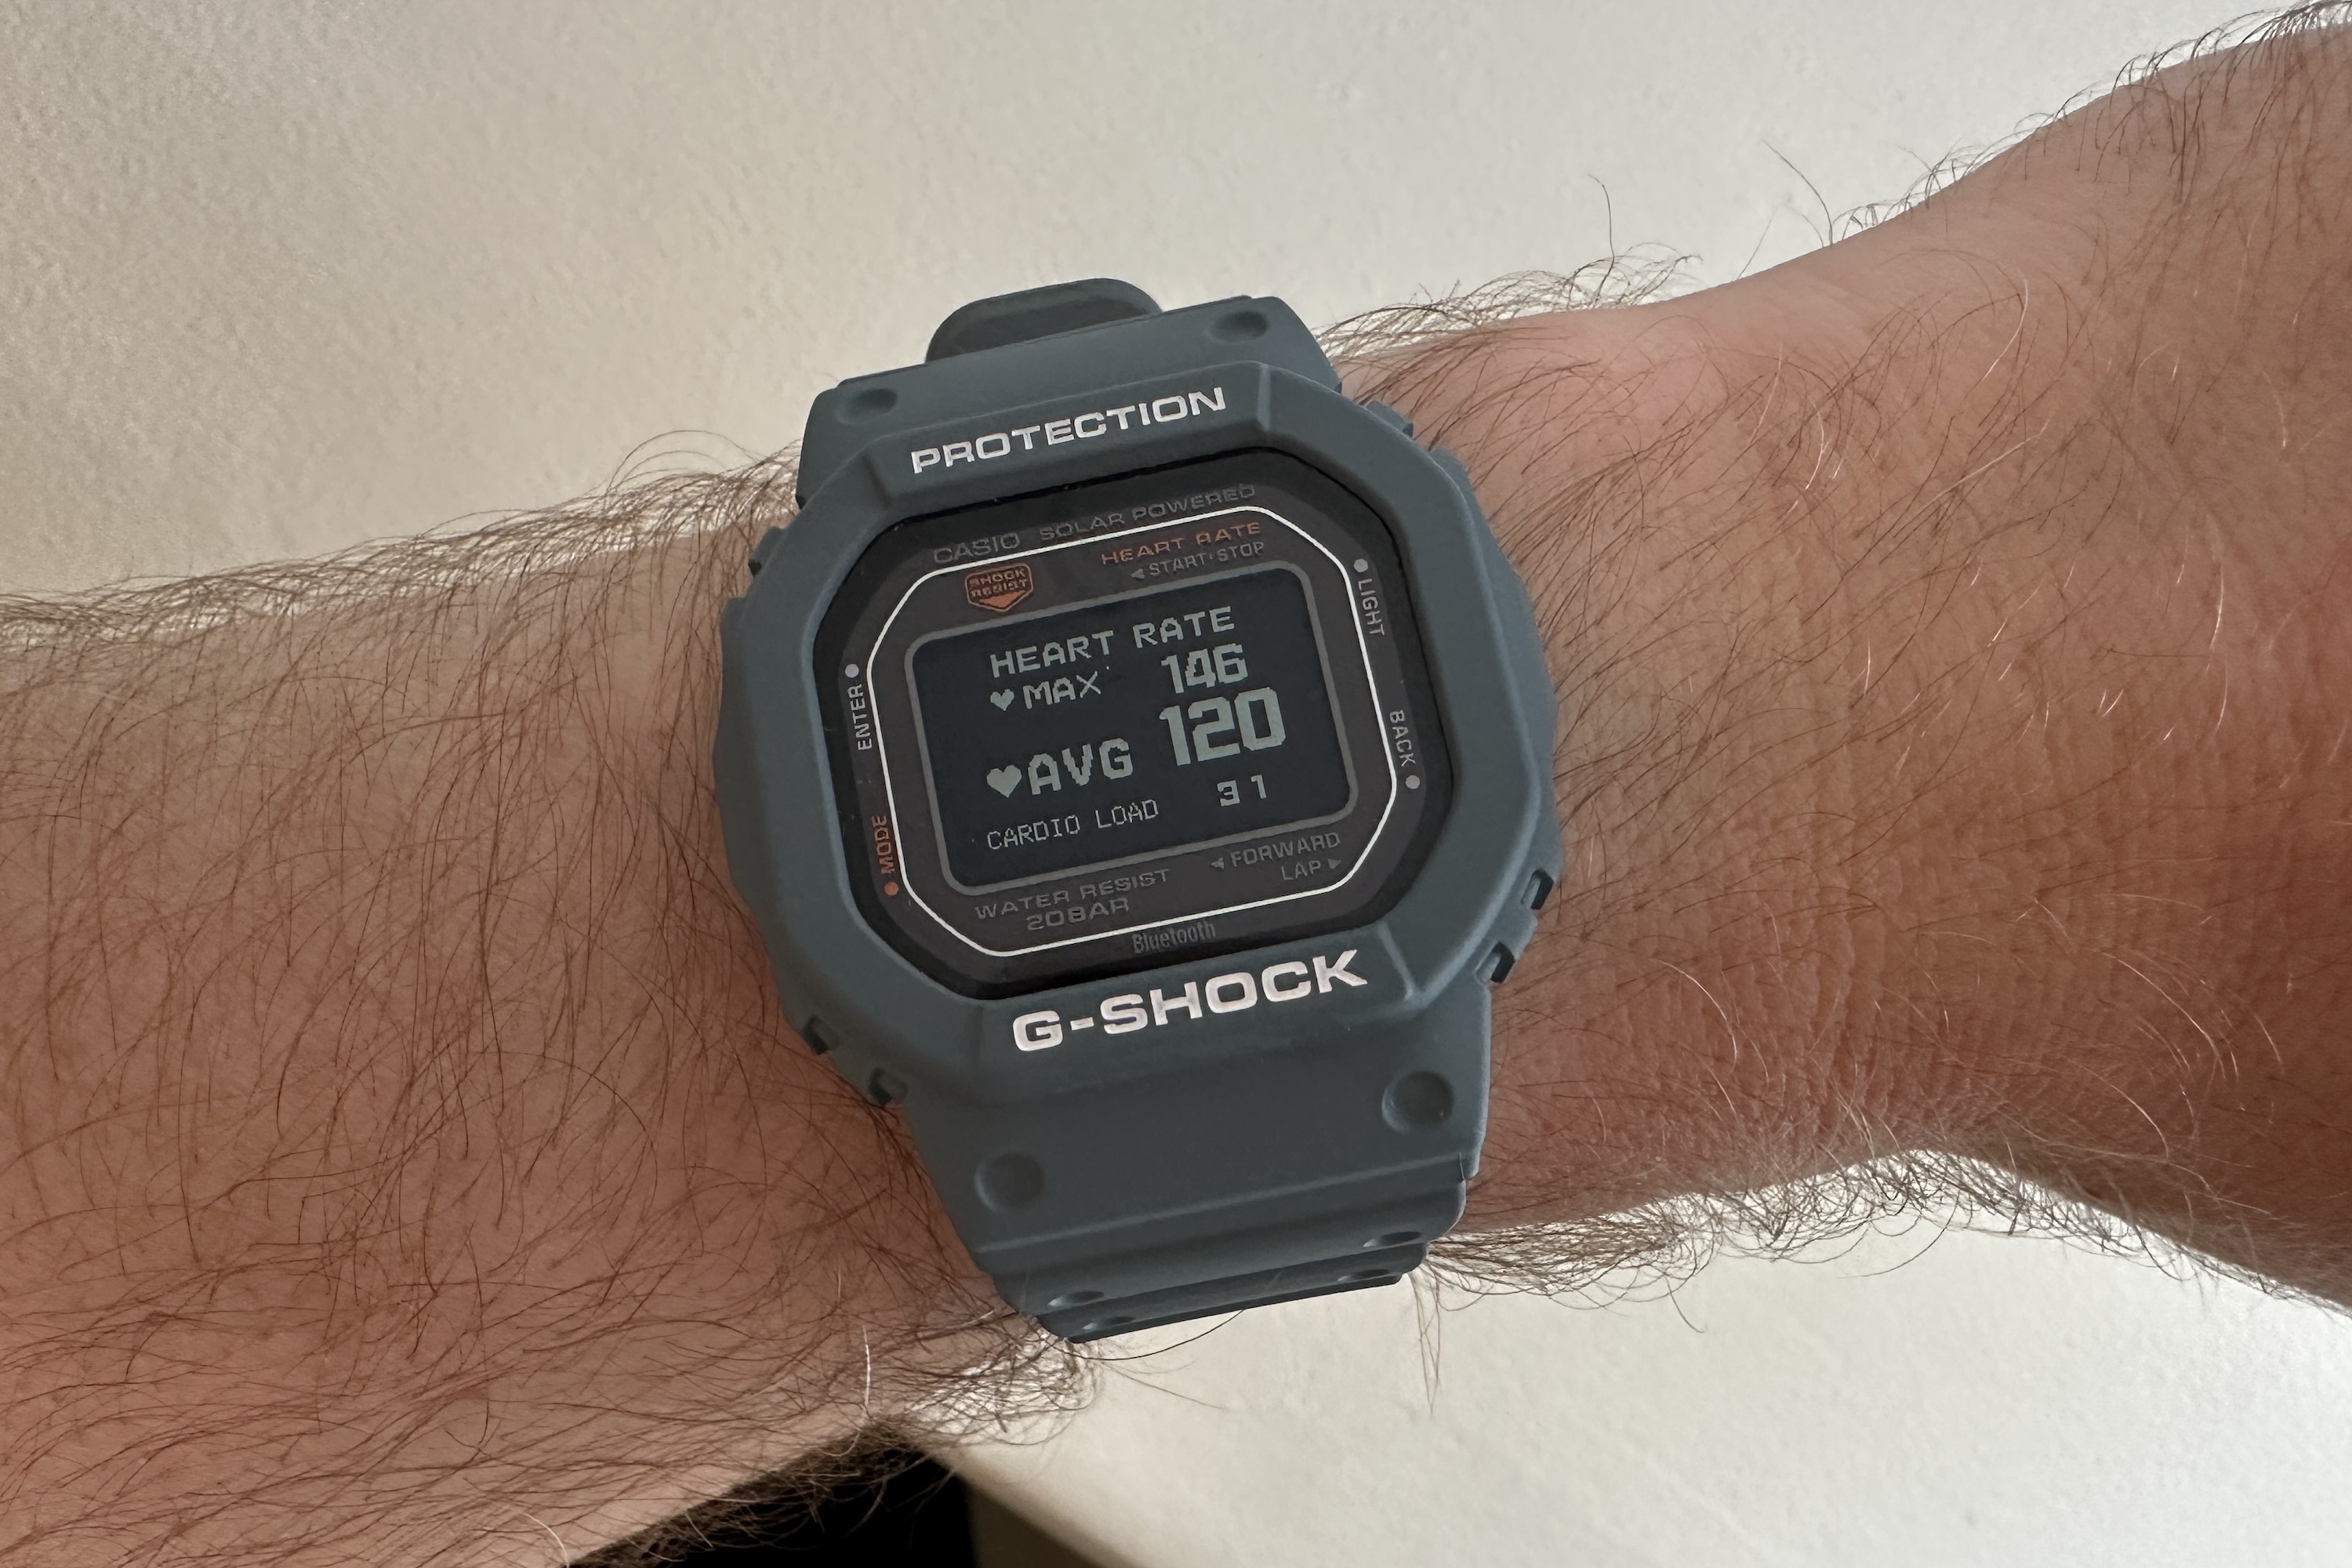 A person wearing the Casio G-Shock DW-H5600, showing workout heart rate data.